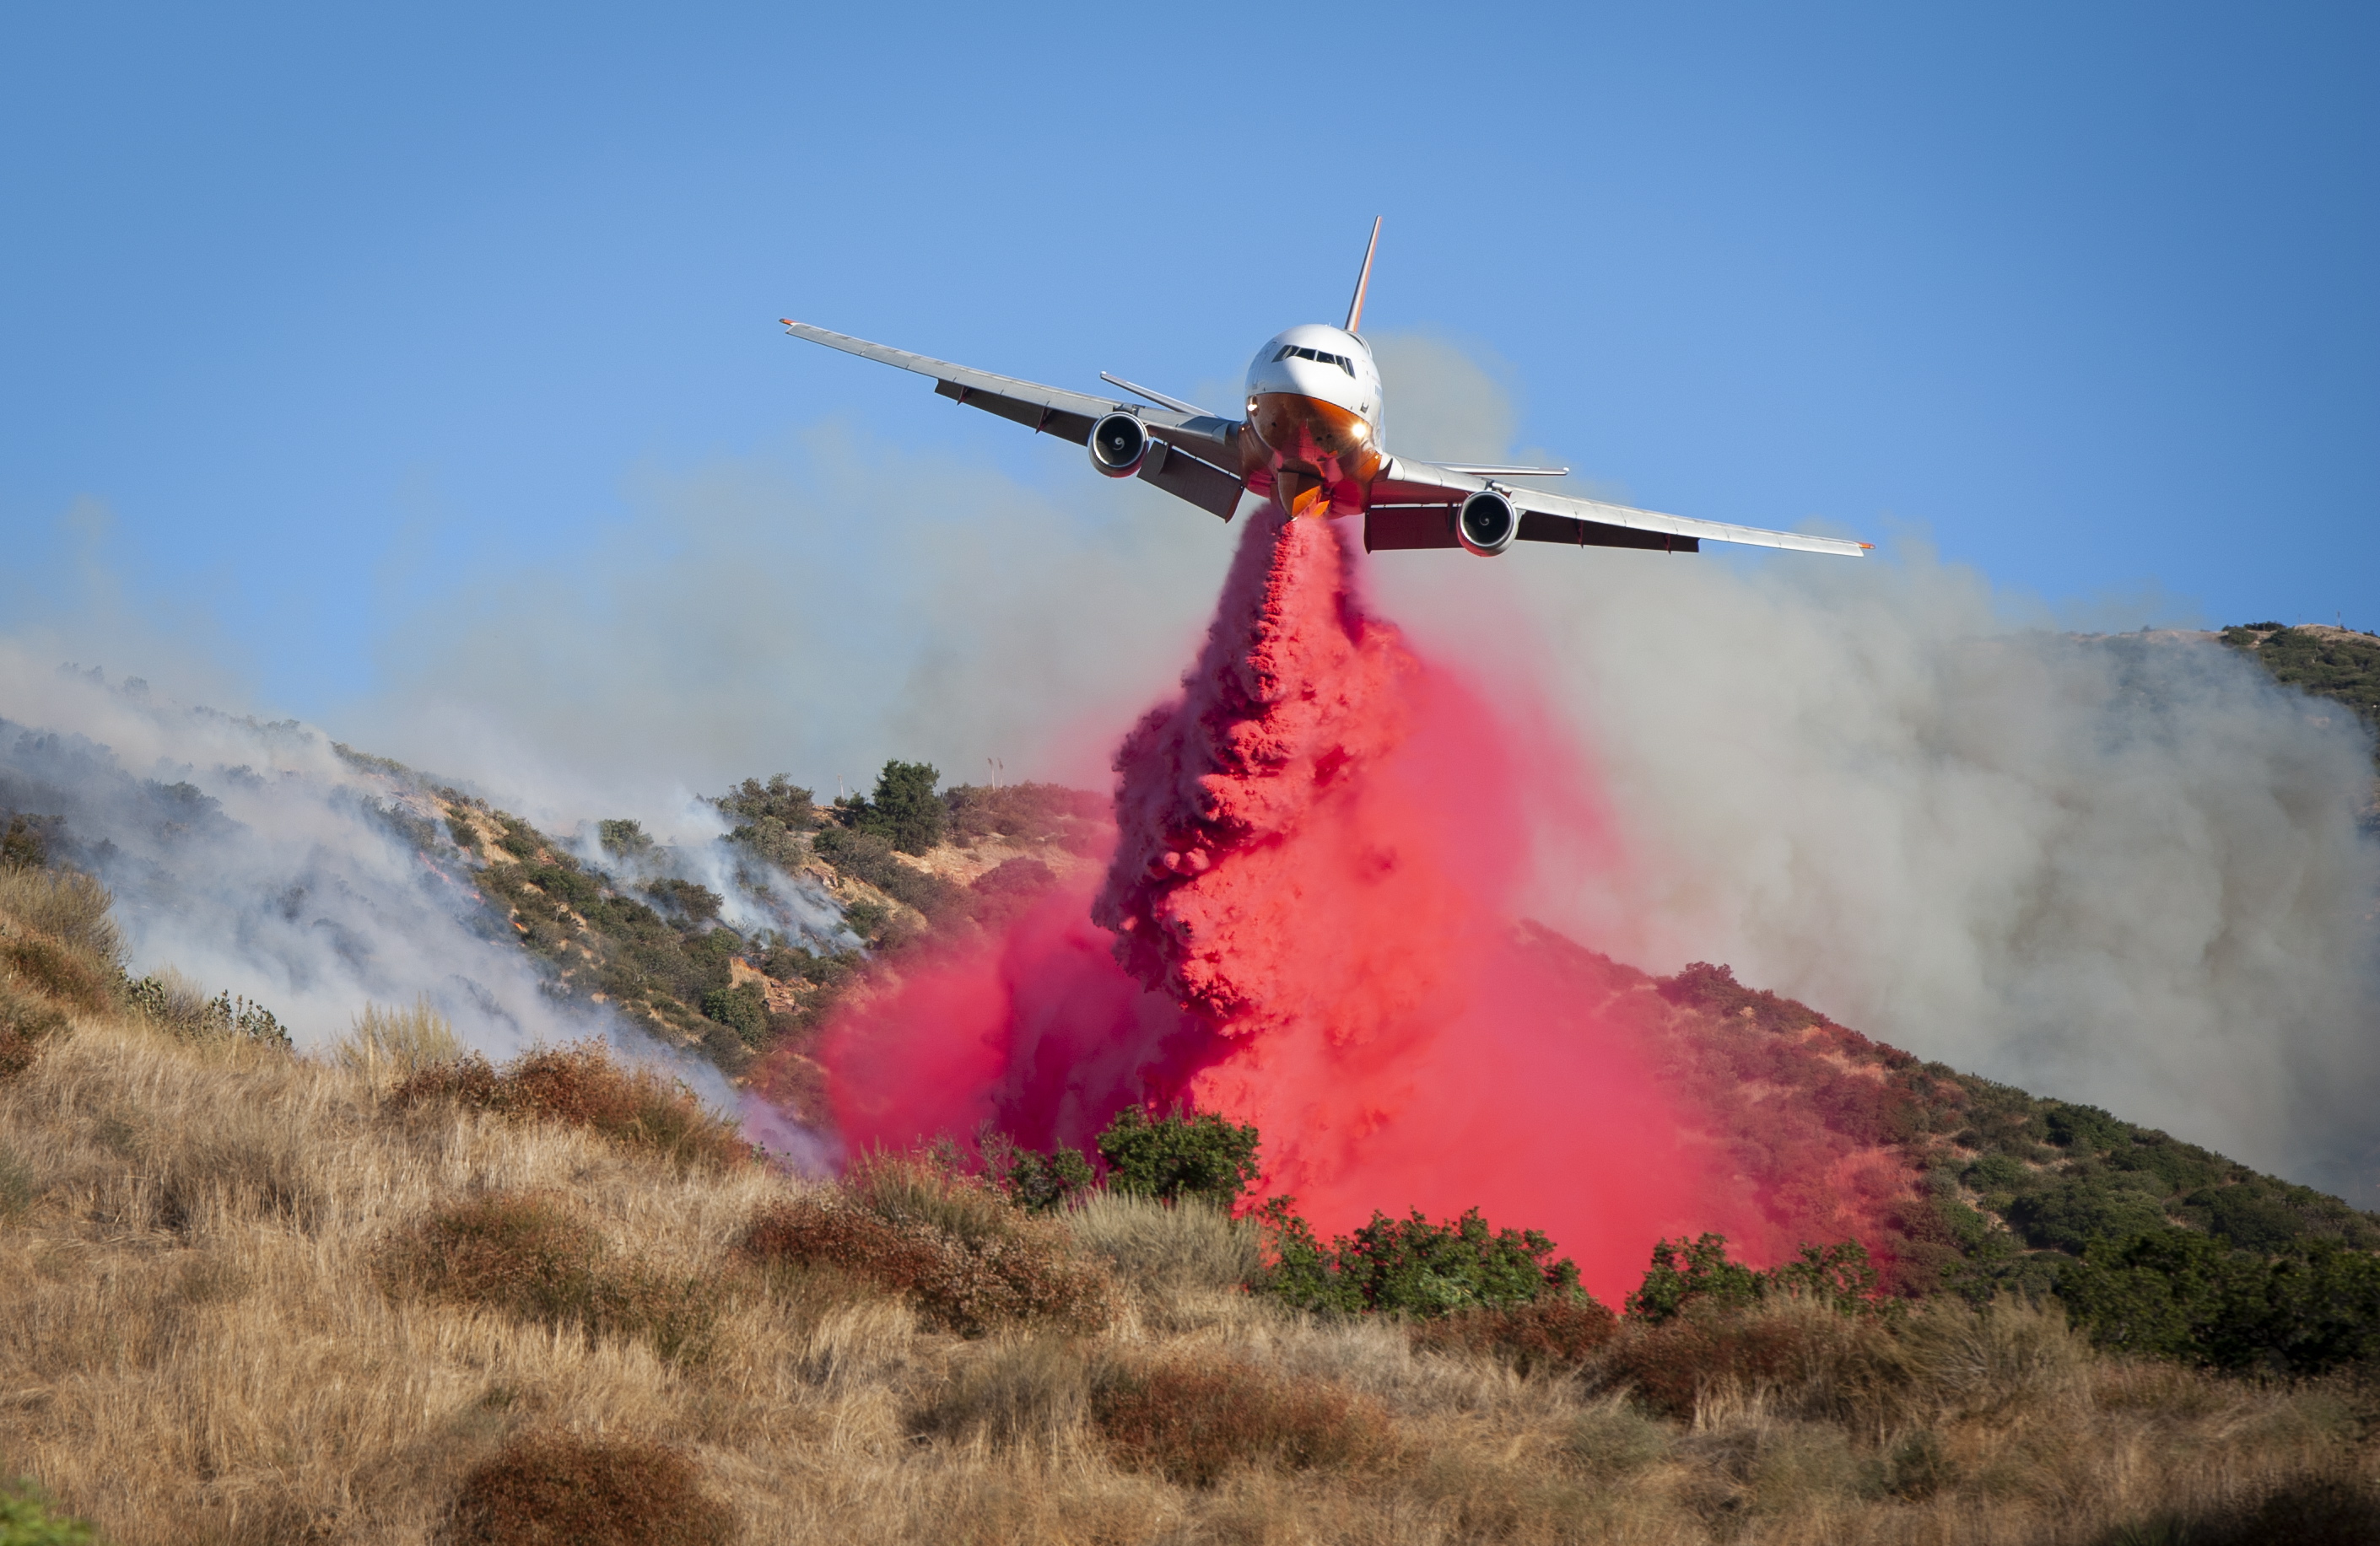 epaselect epa07913908 A large air tanker drops fire retardant on the Saddleridge Fire in Sylmar, California, USA, 11 October 2019. The fire had burned over five thousand acres as of 11 October 2019. According to the latest reports the fire is progressing quickly due to the strong winds, prompting an evacuation of the nearby inhabitants.  EPA/CHRISTIAN MONTERROSA